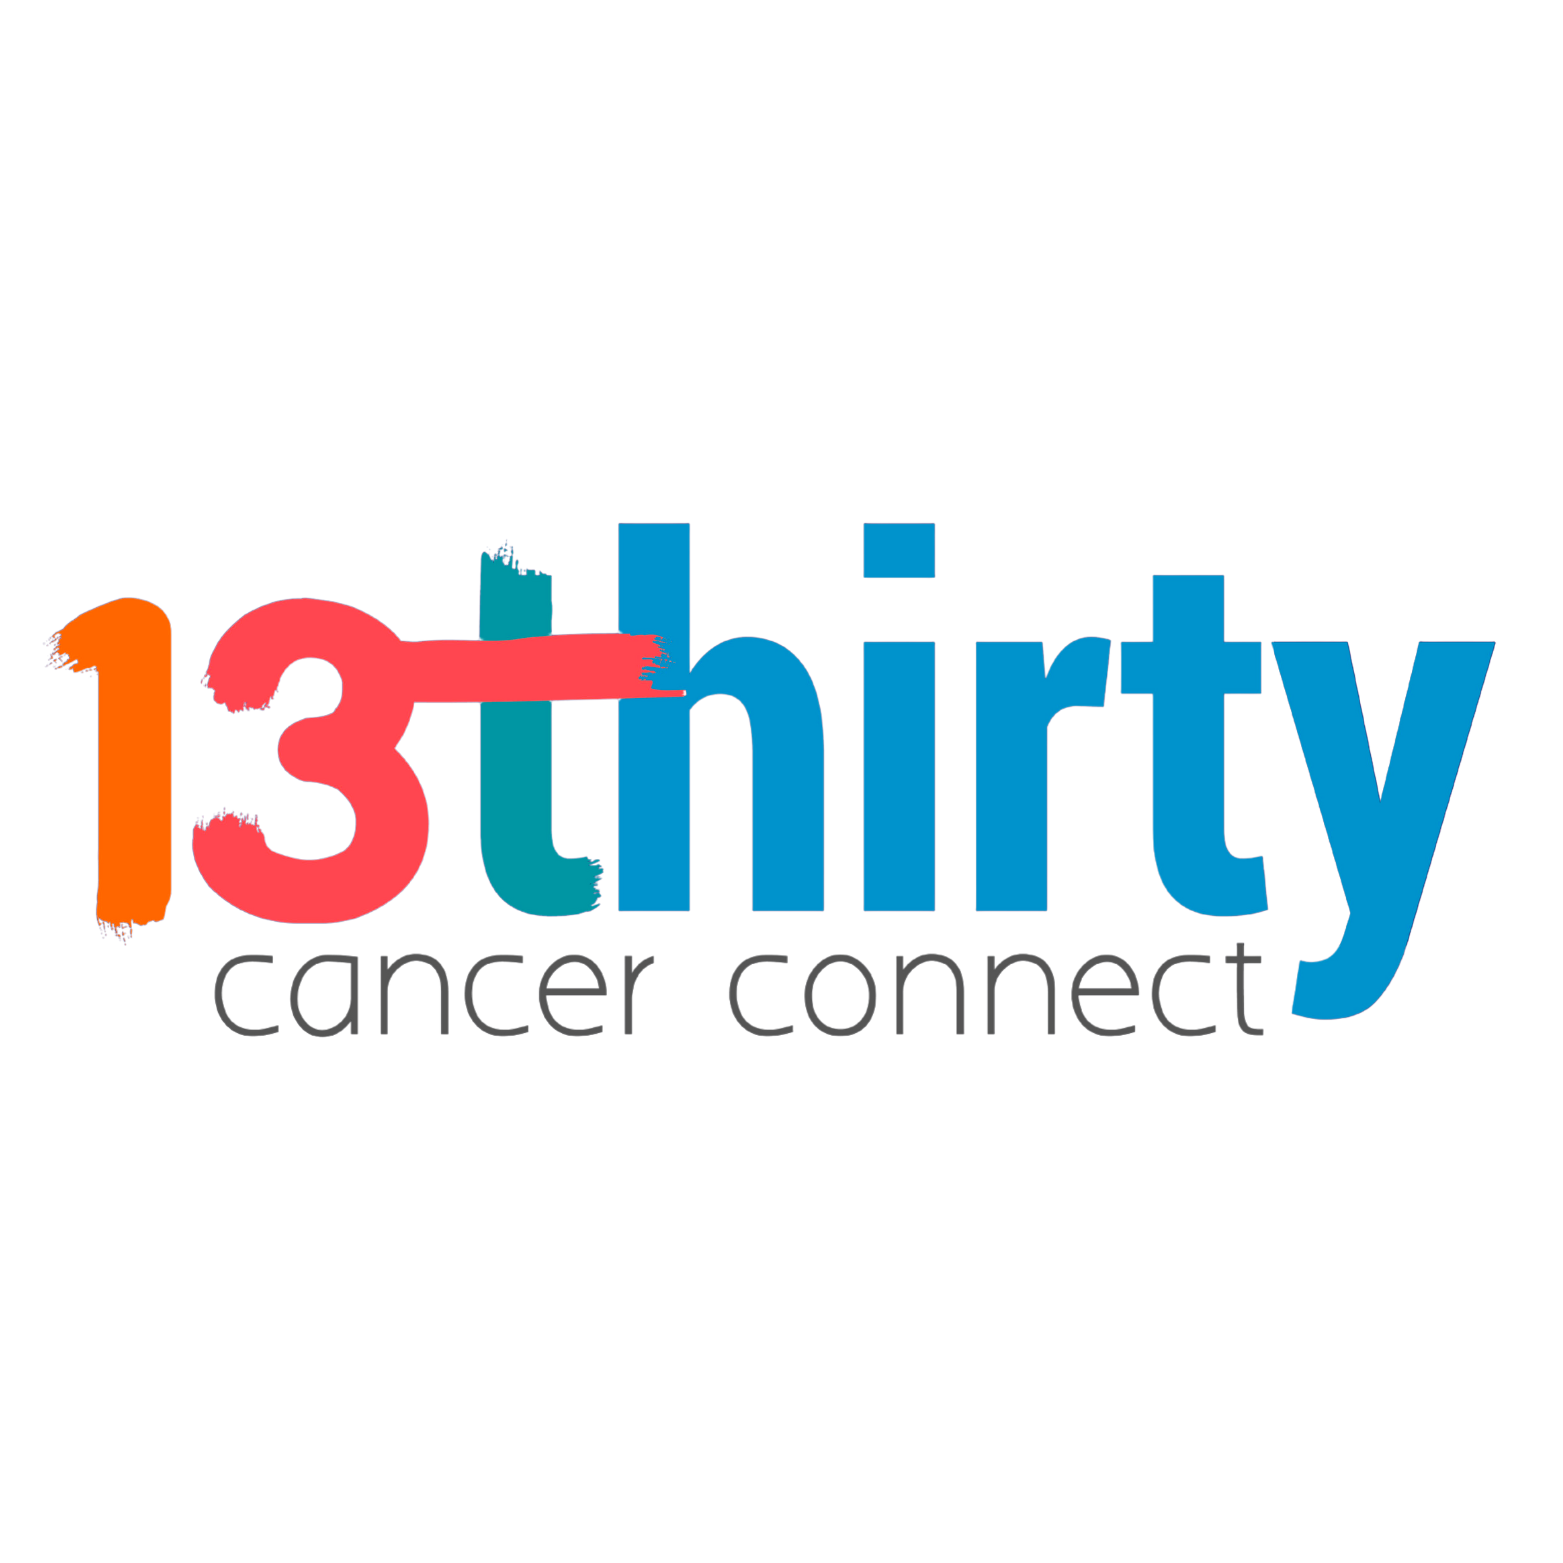 13thirty Cancer Connect